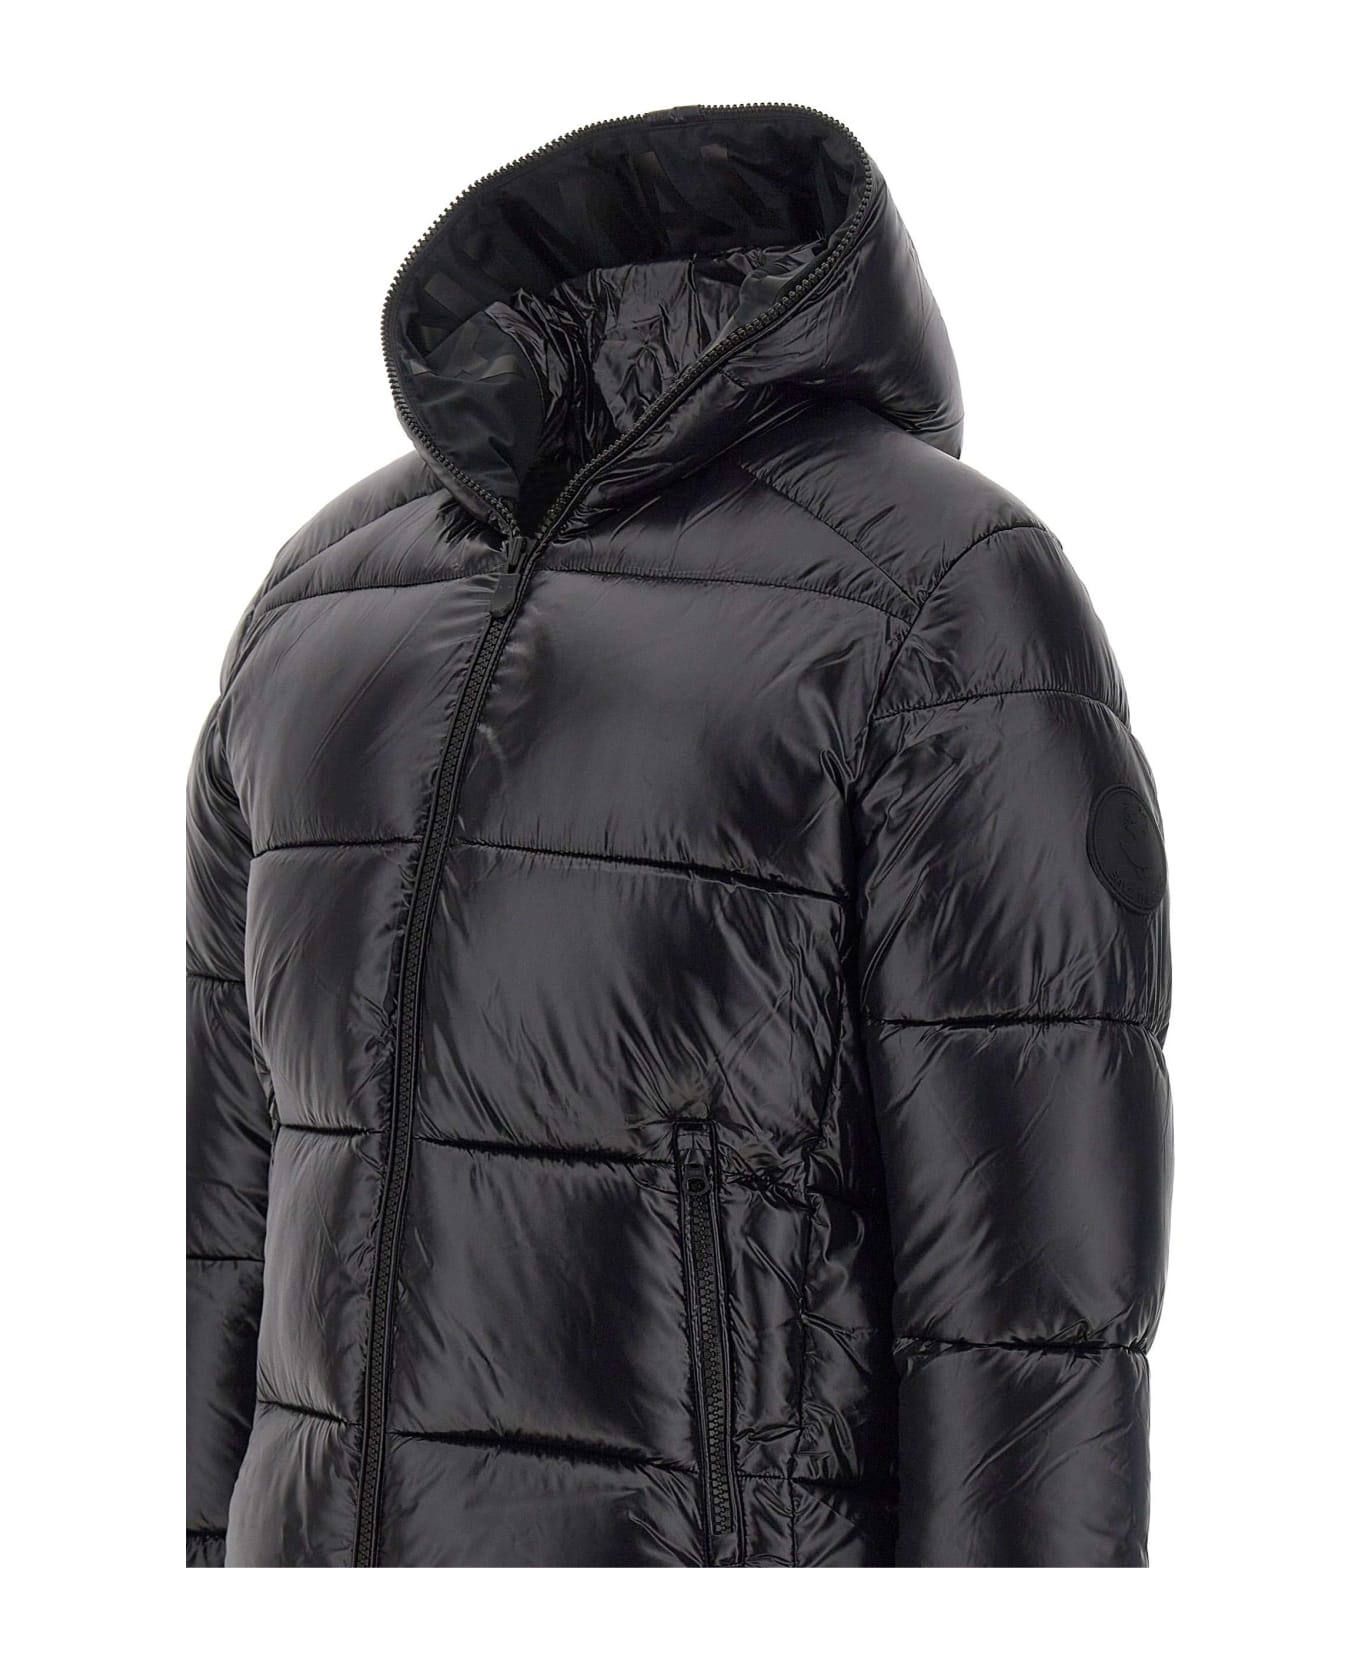 Save the Duck "luck17 Edgard" Down Jacket - BLACK